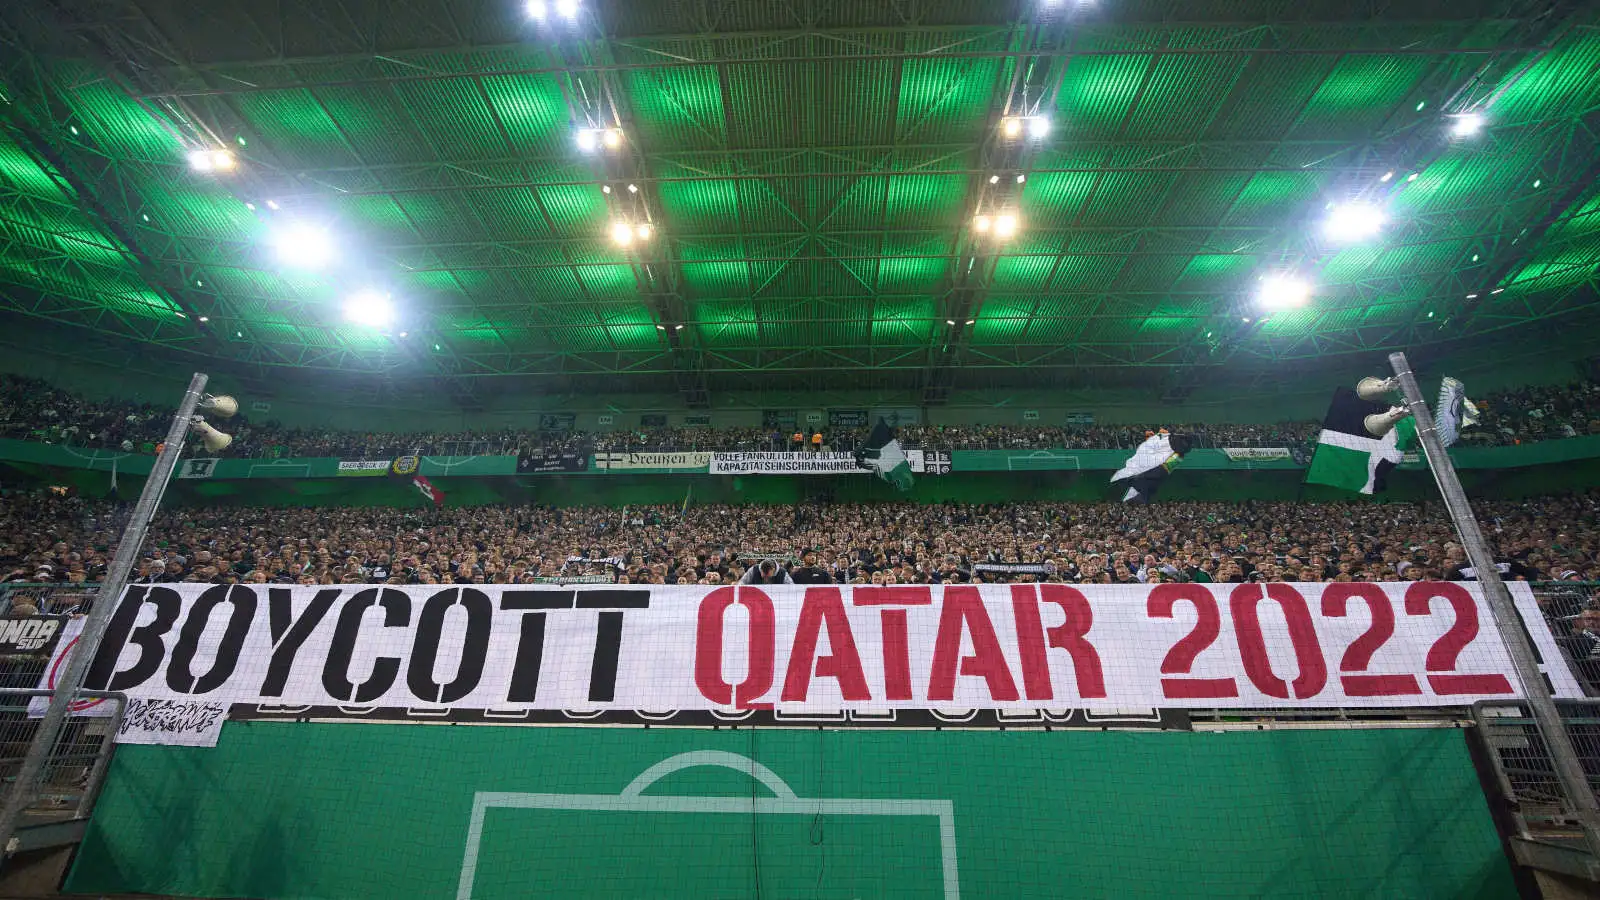 A protest against the Qatar 2022 World Cup